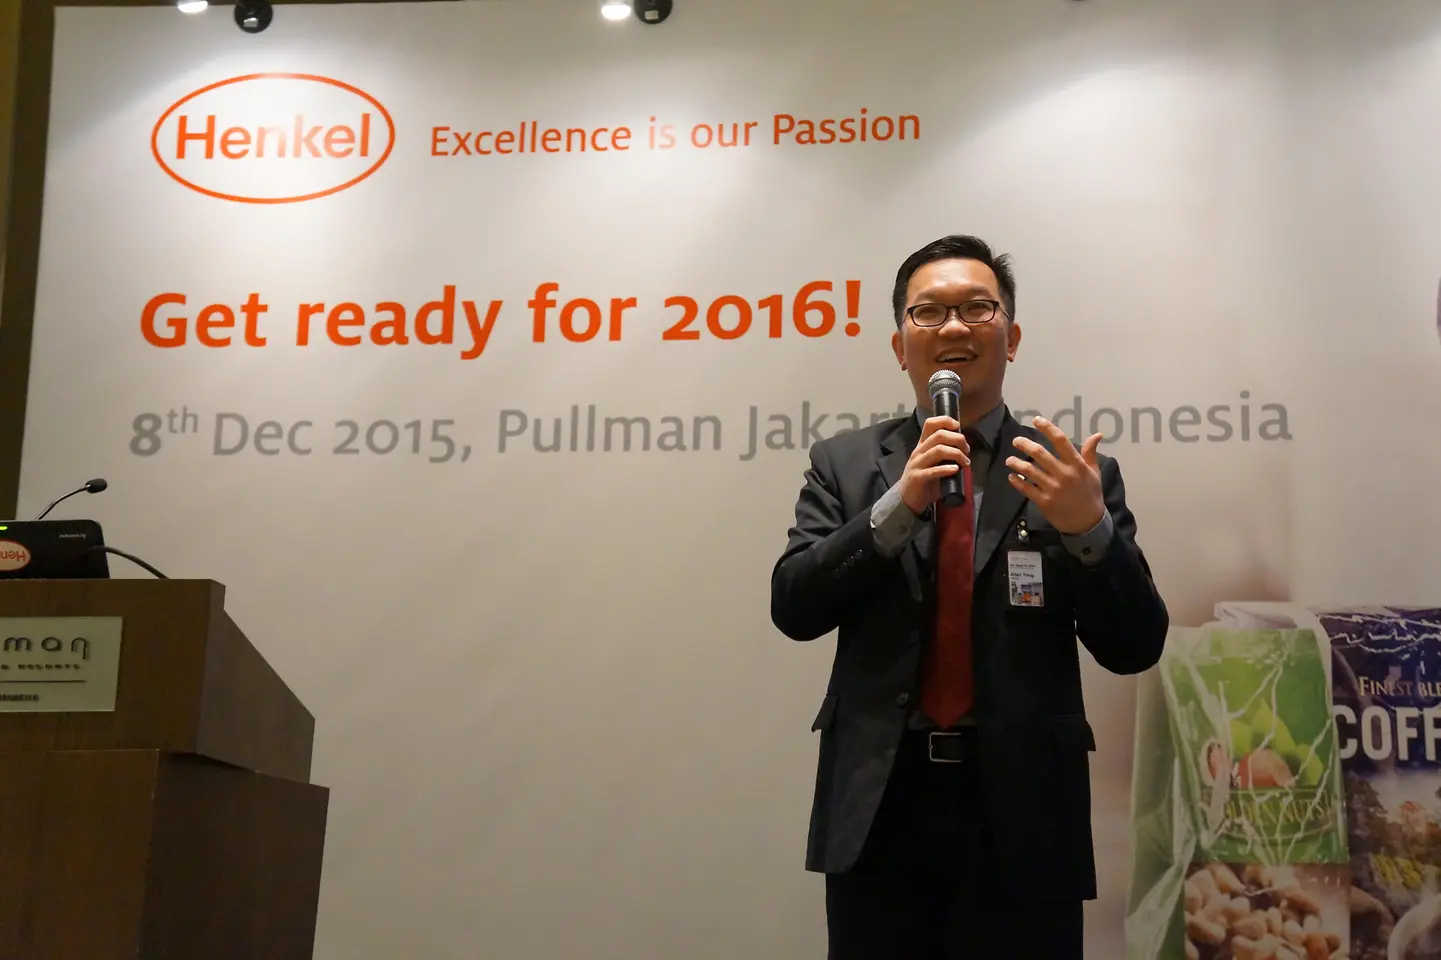 Allan Yong, President, Henkel Indonesia, delivering his opening speech at the Henkel “Get ready for 2016” forum